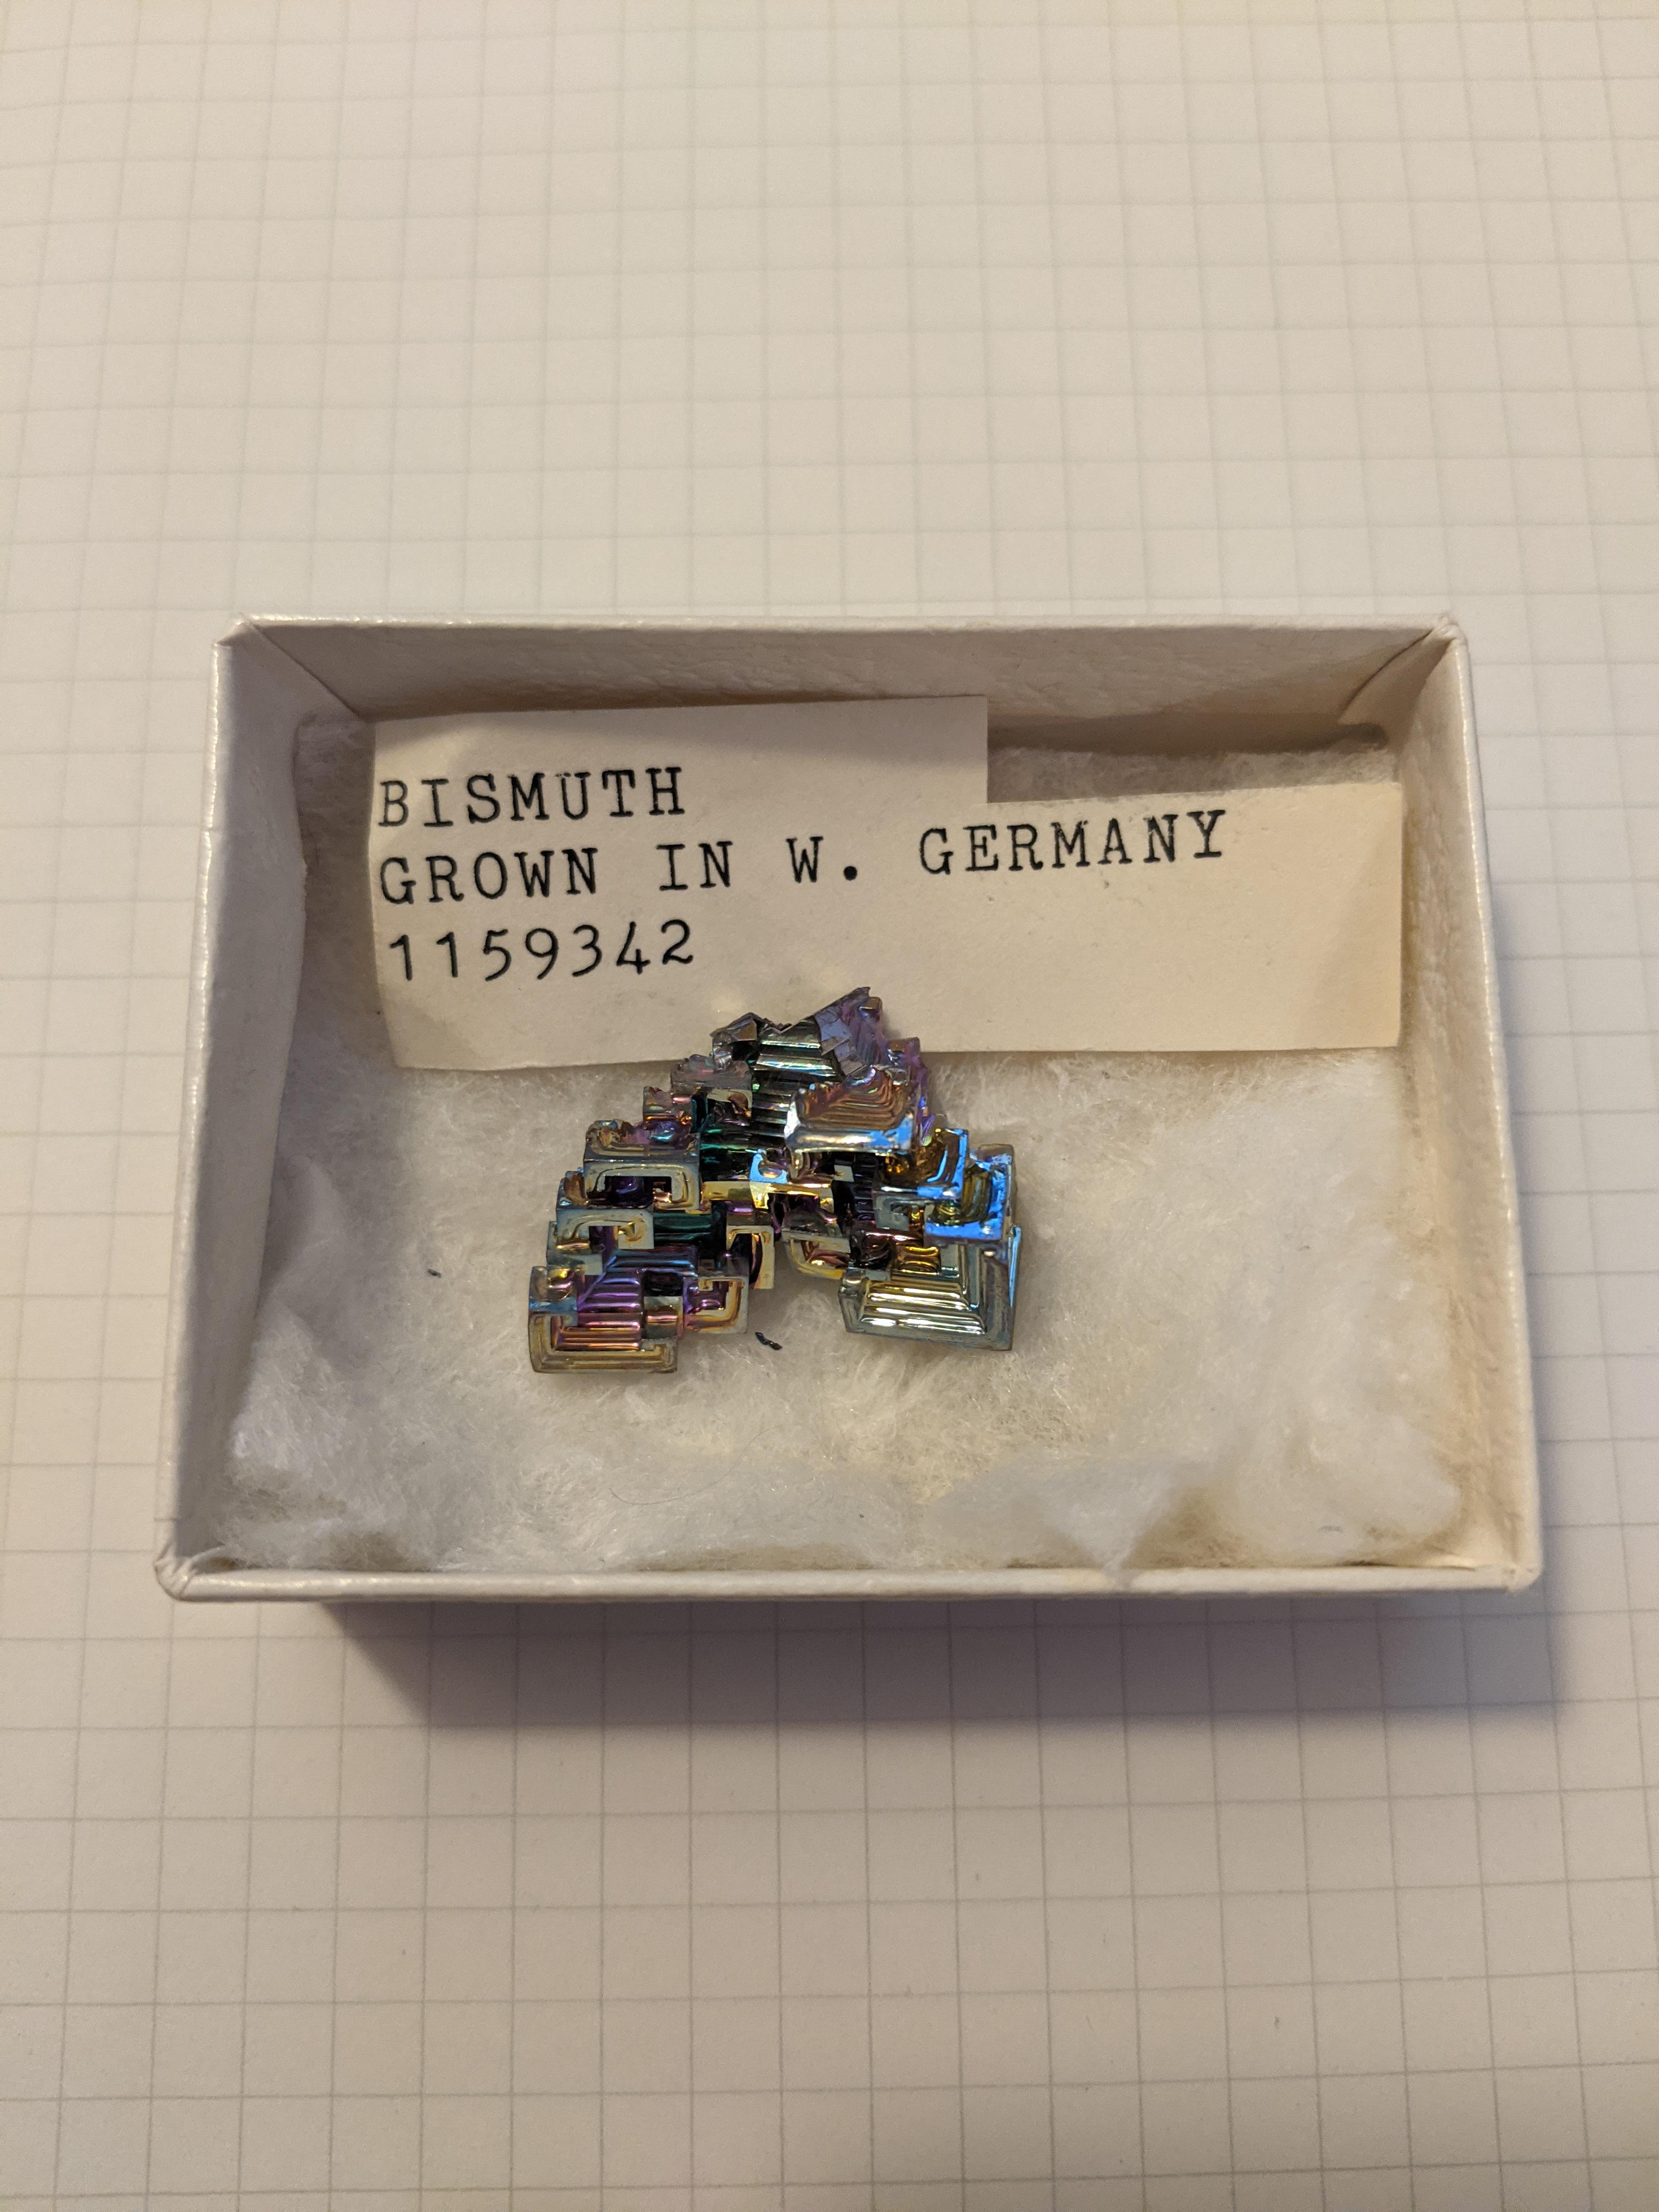 West Germany had the best Bismuth.